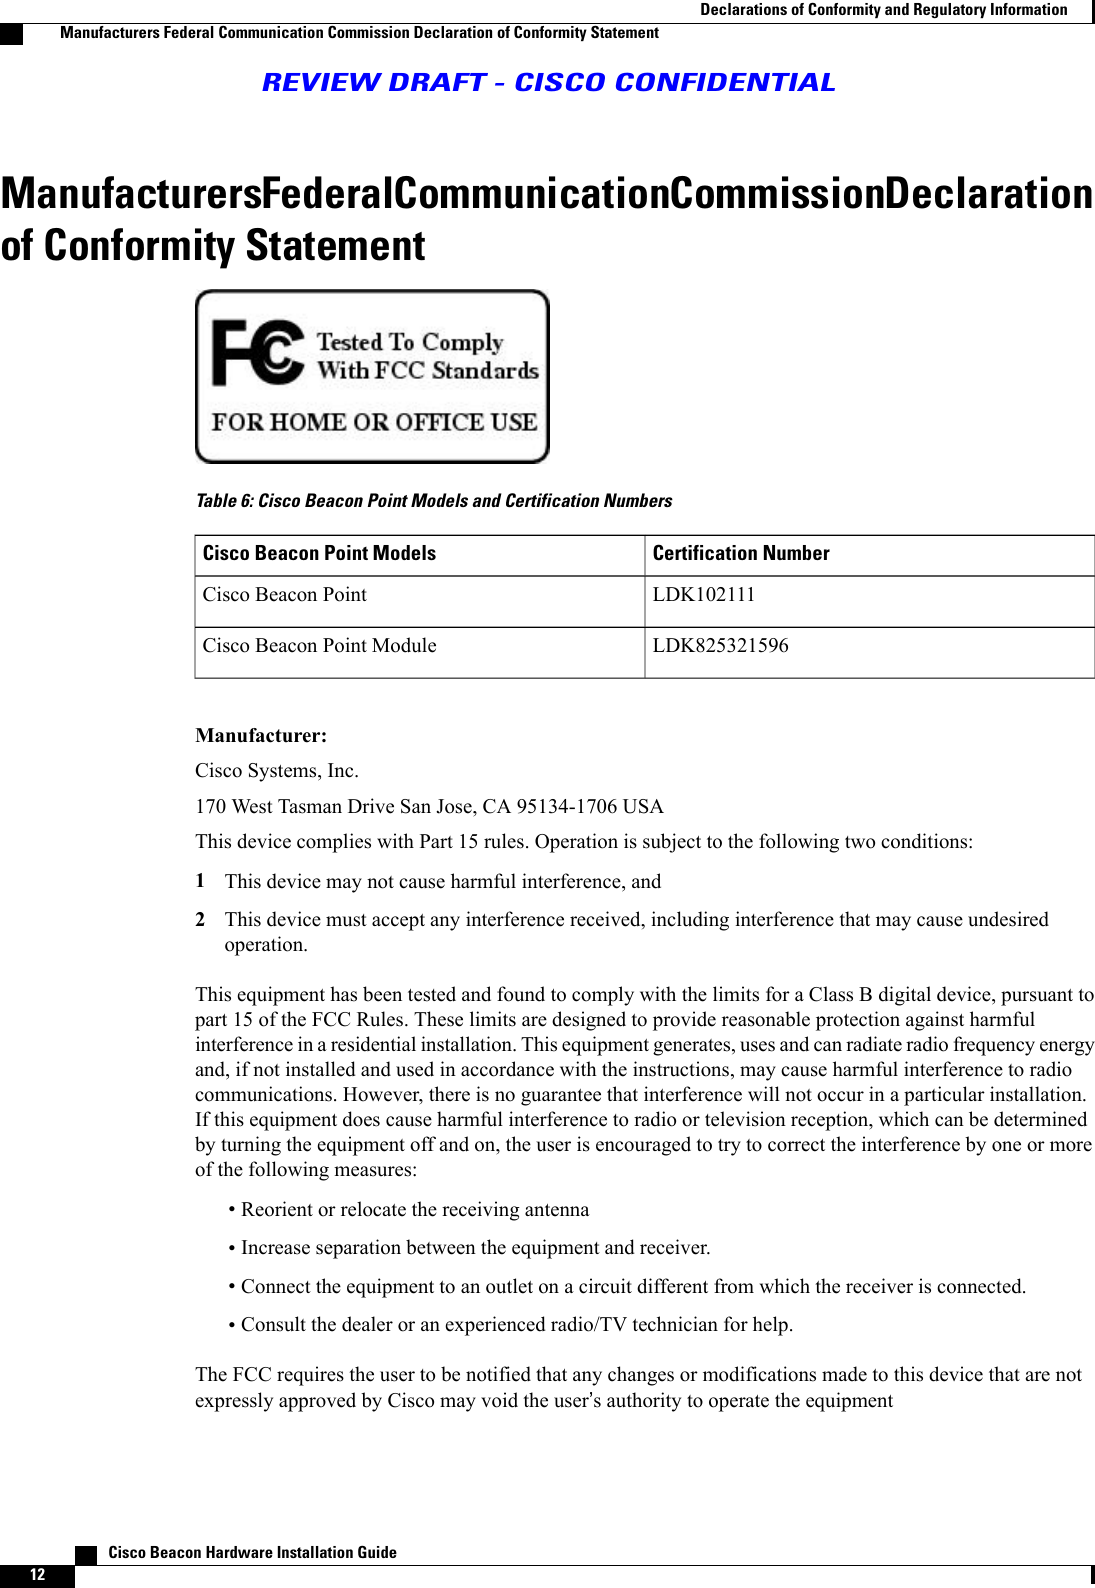 Manufacturers Federal Communication Commission Declarationof Conformity StatementTable 6: Cisco Beacon Point Models and Certification NumbersCertification NumberCisco Beacon Point ModelsLDK102111Cisco Beacon PointLDK825321596Cisco Beacon Point ModuleManufacturer:Cisco Systems, Inc.170 West Tasman Drive San Jose, CA 95134-1706 USAThis device complies with Part 15 rules. Operation is subject to the following two conditions:1This device may not cause harmful interference, and2This device must accept any interference received, including interference that may cause undesiredoperation.This equipment has been tested and found to comply with the limits for a Class B digital device, pursuant topart 15 of the FCC Rules. These limits are designed to provide reasonable protection against harmfulinterference in a residential installation. This equipment generates, uses and can radiate radio frequency energyand, if not installed and used in accordance with the instructions, may cause harmful interference to radiocommunications. However, there is no guarantee that interference will not occur in a particular installation.If this equipment does cause harmful interference to radio or television reception, which can be determinedby turning the equipment off and on, the user is encouraged to try to correct the interference by one or moreof the following measures:•Reorient or relocate the receiving antenna•Increase separation between the equipment and receiver.•Connect the equipment to an outlet on a circuit different from which the receiver is connected.•Consult the dealer or an experienced radio/TV technician for help.The FCC requires the user to be notified that any changes or modifications made to this device that are notexpressly approved by Cisco may void the user’s authority to operate the equipment   Cisco Beacon Hardware Installation Guide12Declarations of Conformity and Regulatory InformationManufacturers Federal Communication Commission Declaration of Conformity StatementREVIEW DRAFT - CISCO CONFIDENTIAL